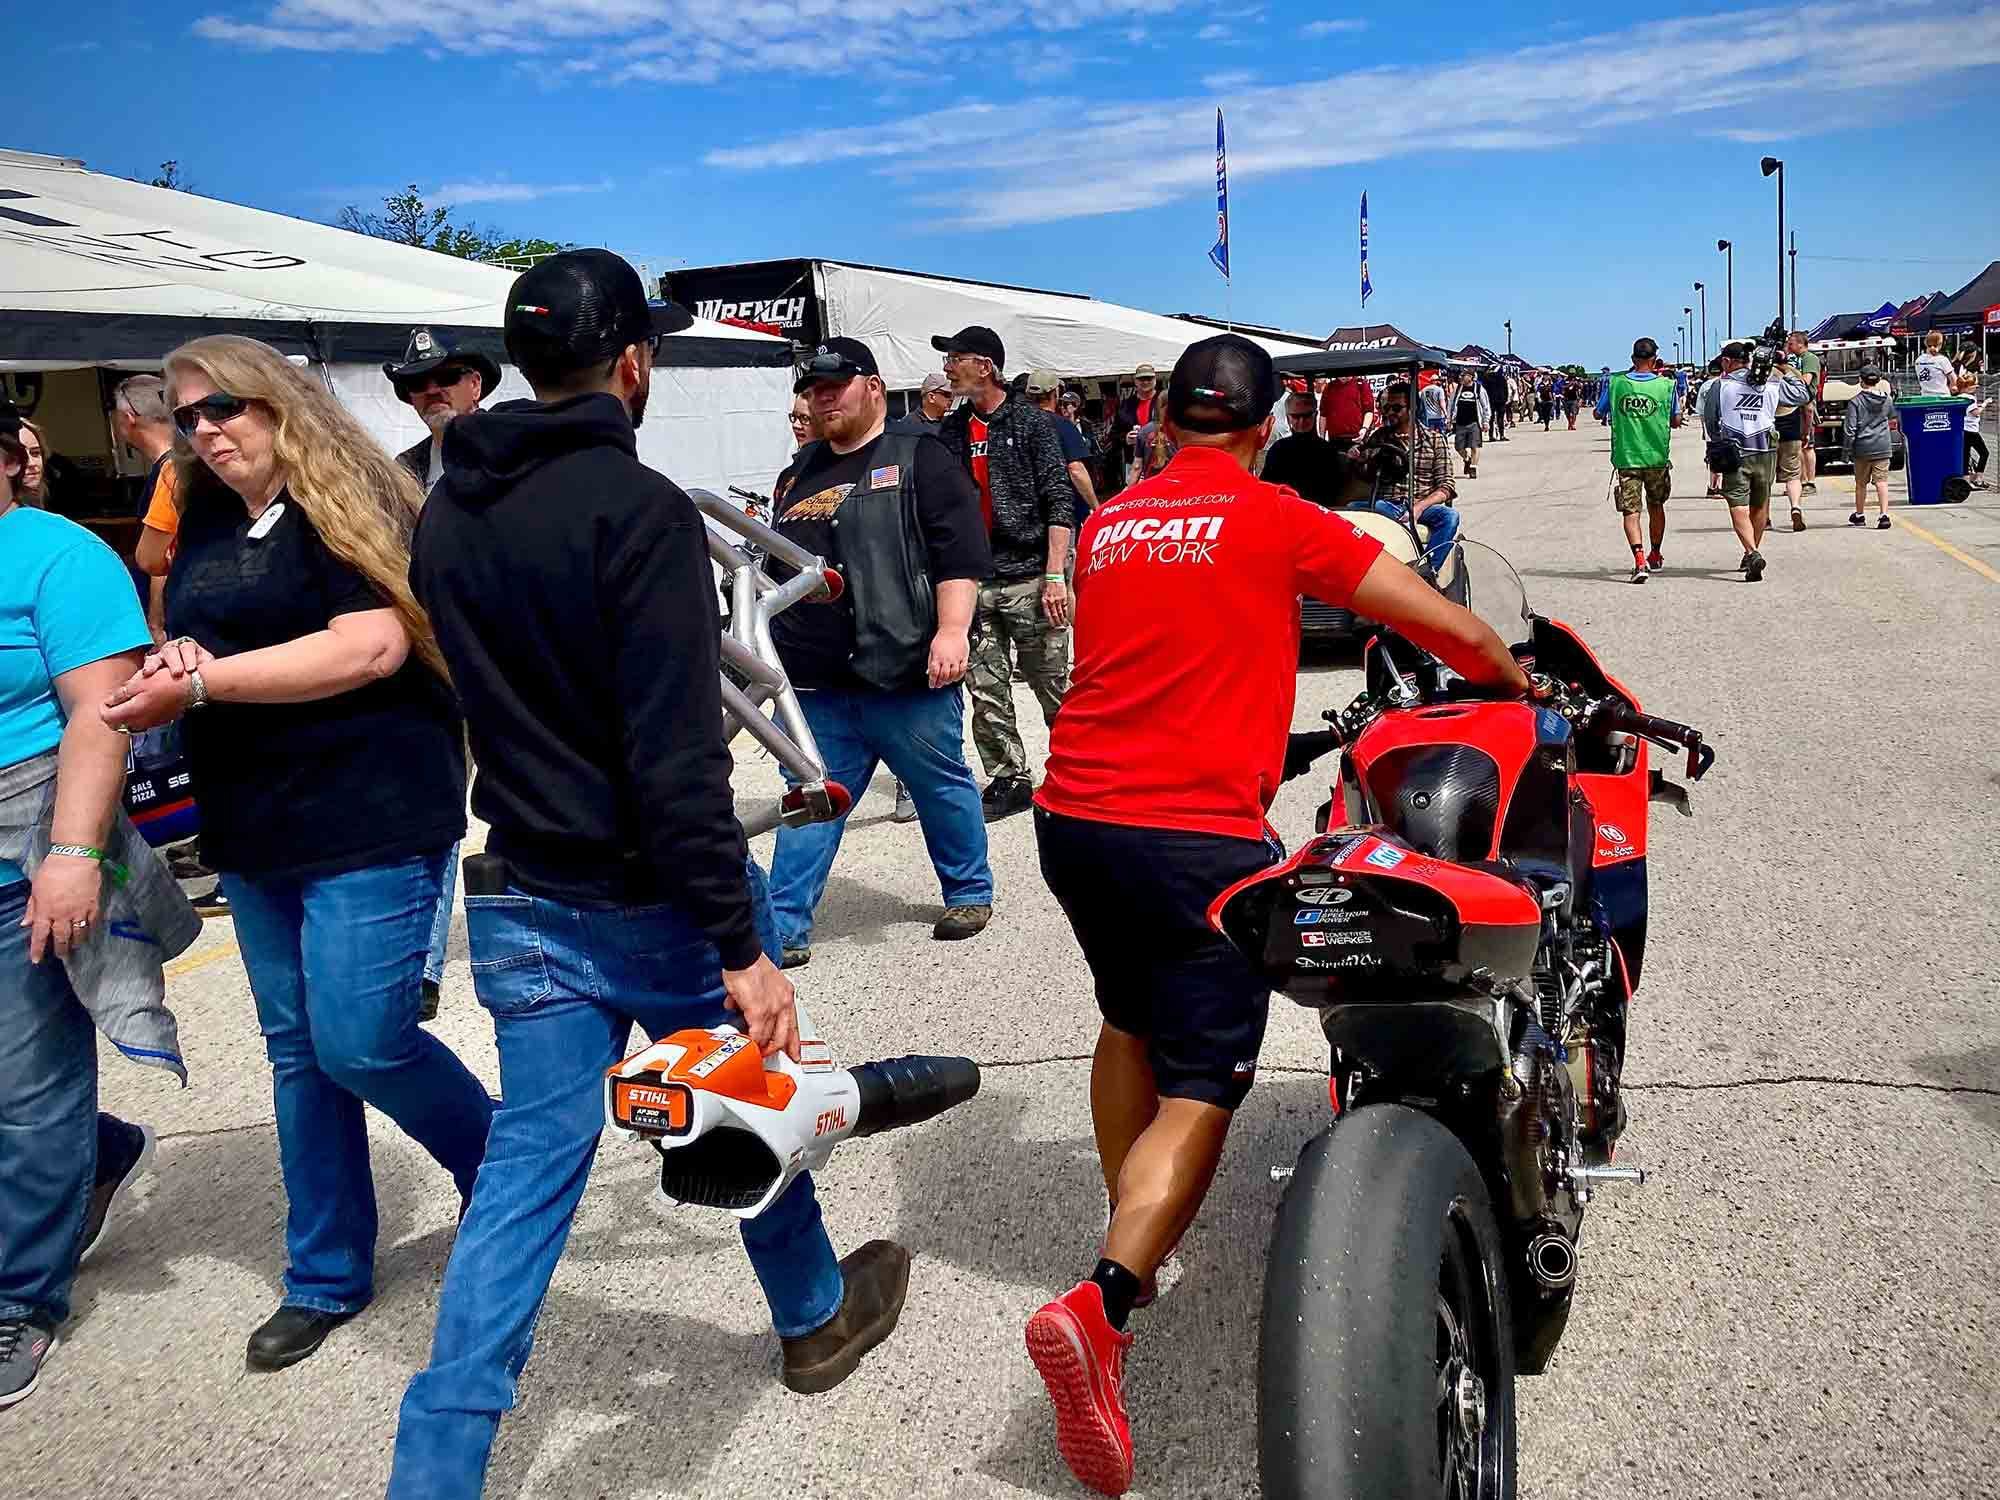 One of the Warhorse HSBK Racing Ducatis is wheeled through the unwashed masses.